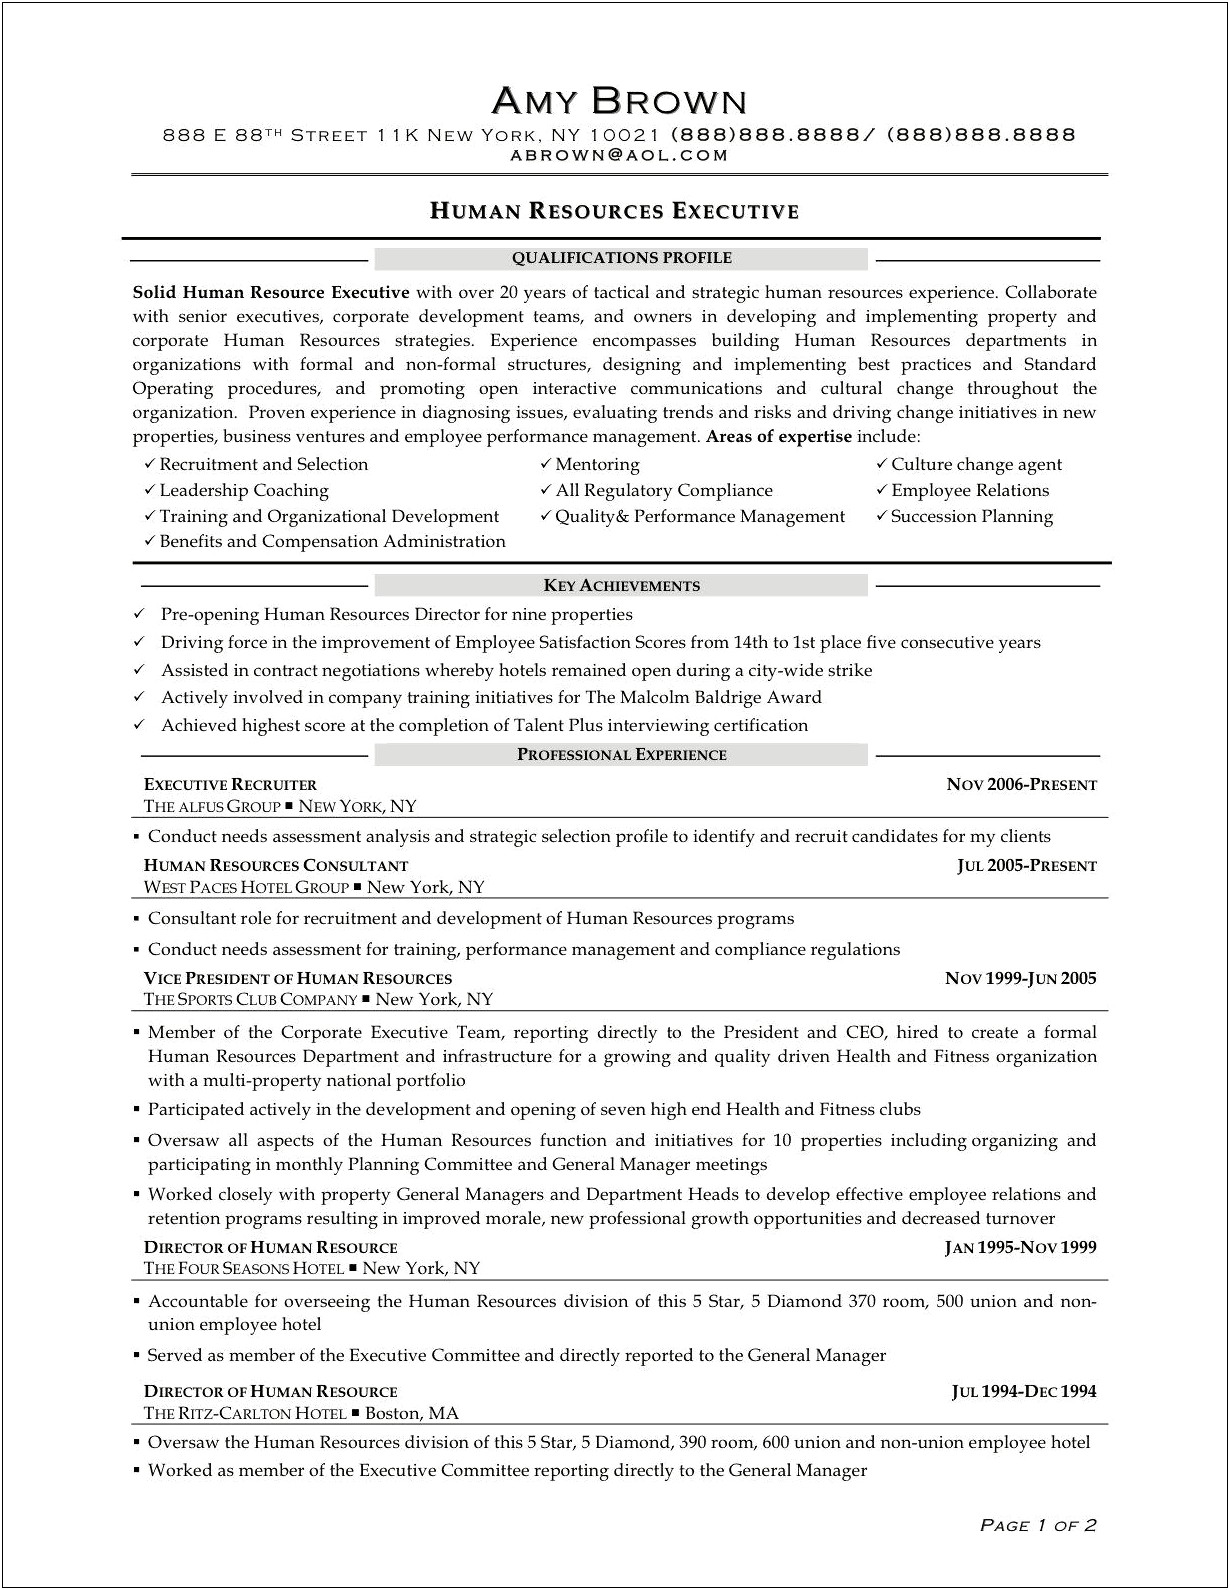 Sample Of Human Resources Resume Objective